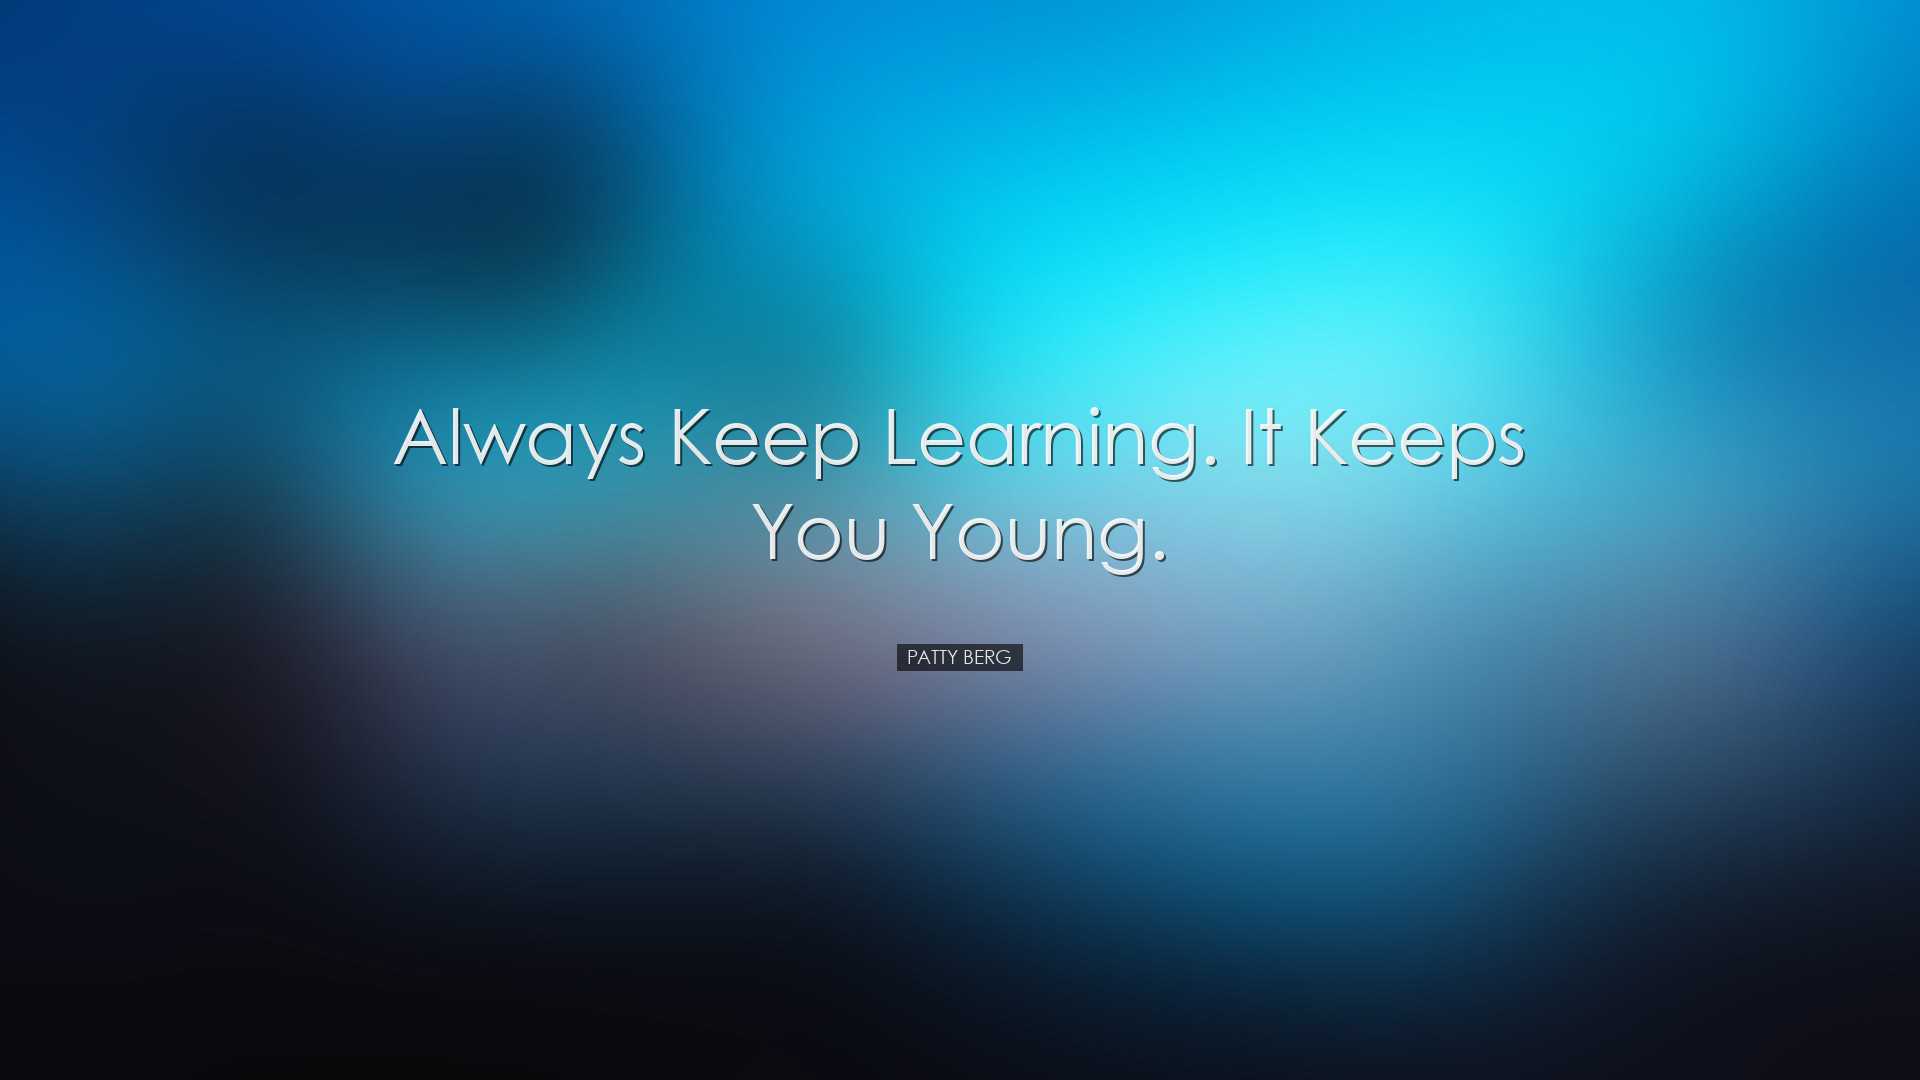 Always keep learning. It keeps you young. - Patty Berg